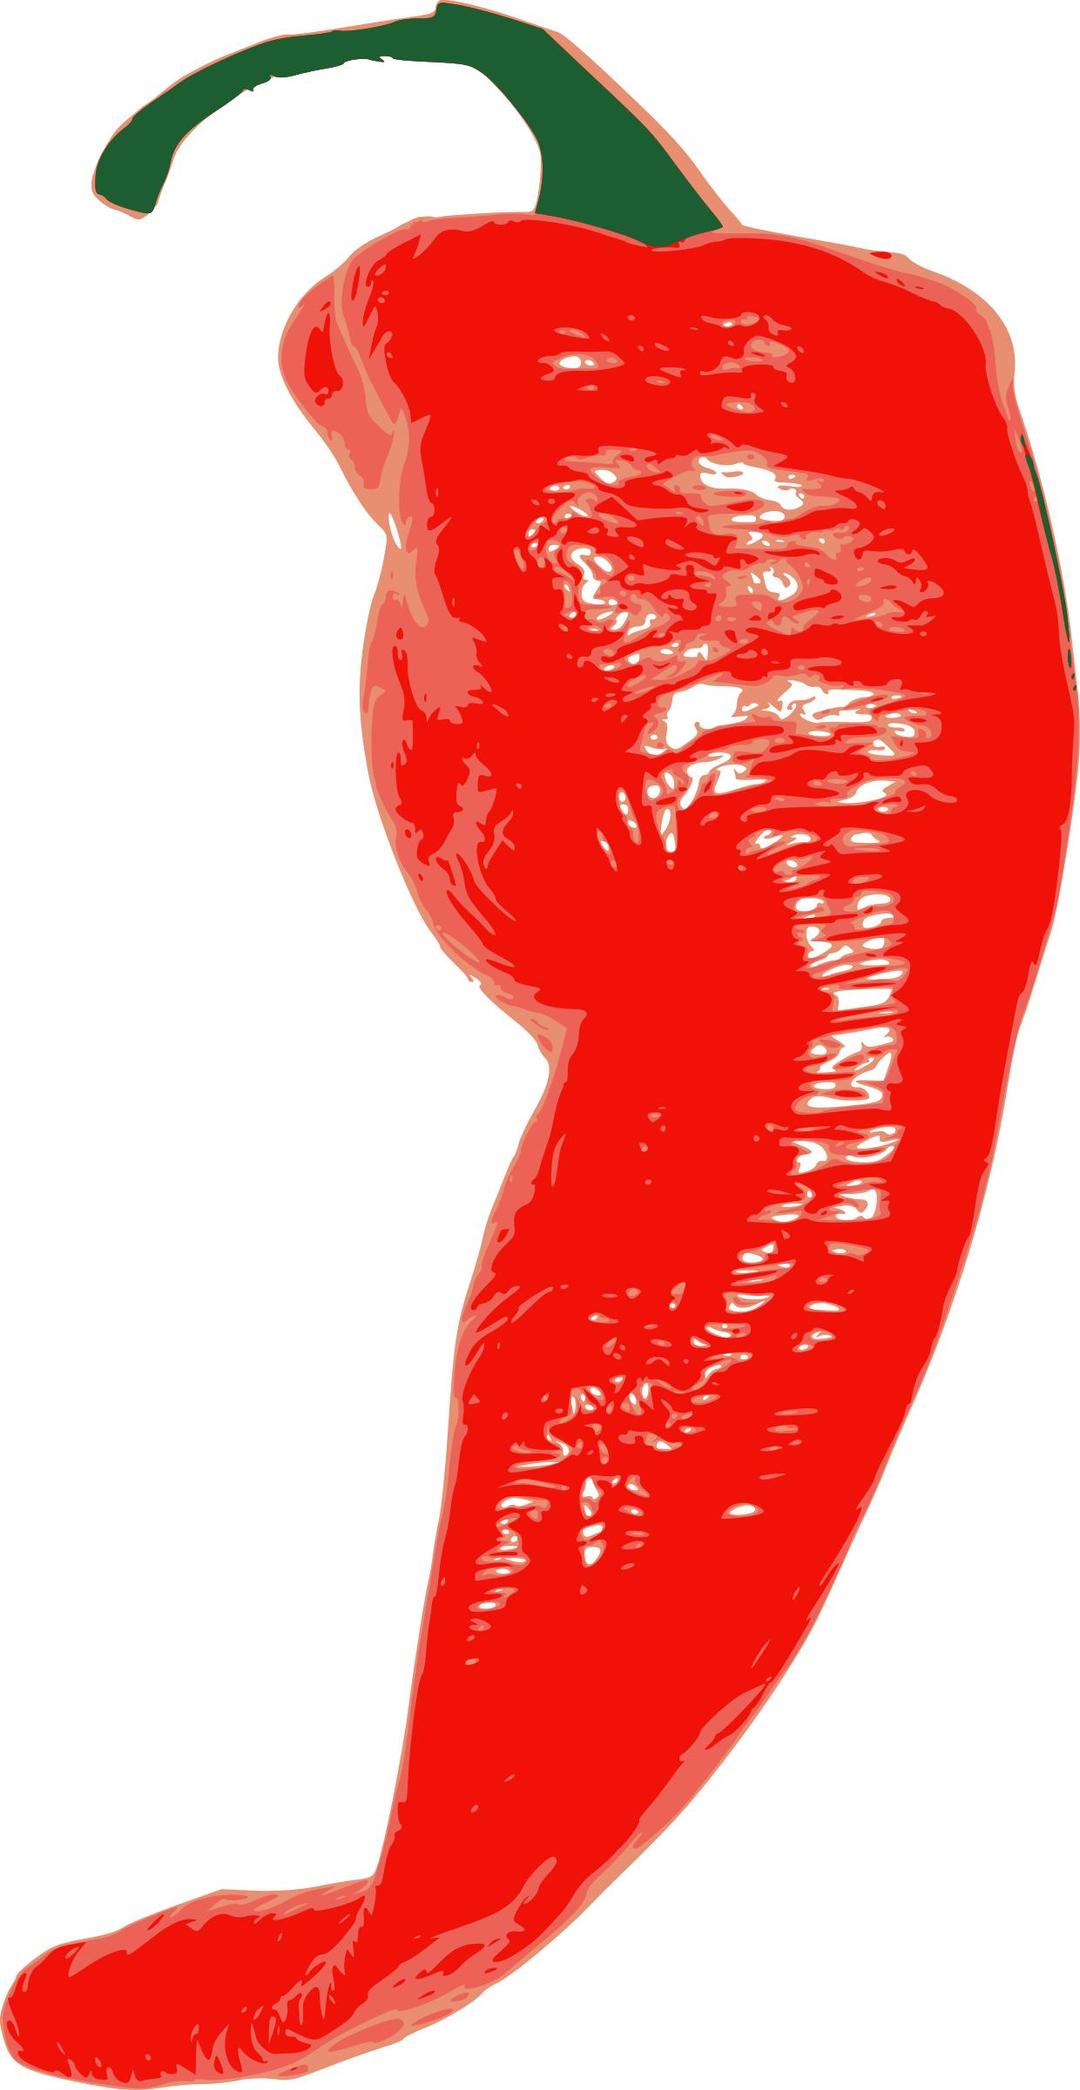 Cayenne red chili pepper png transparent